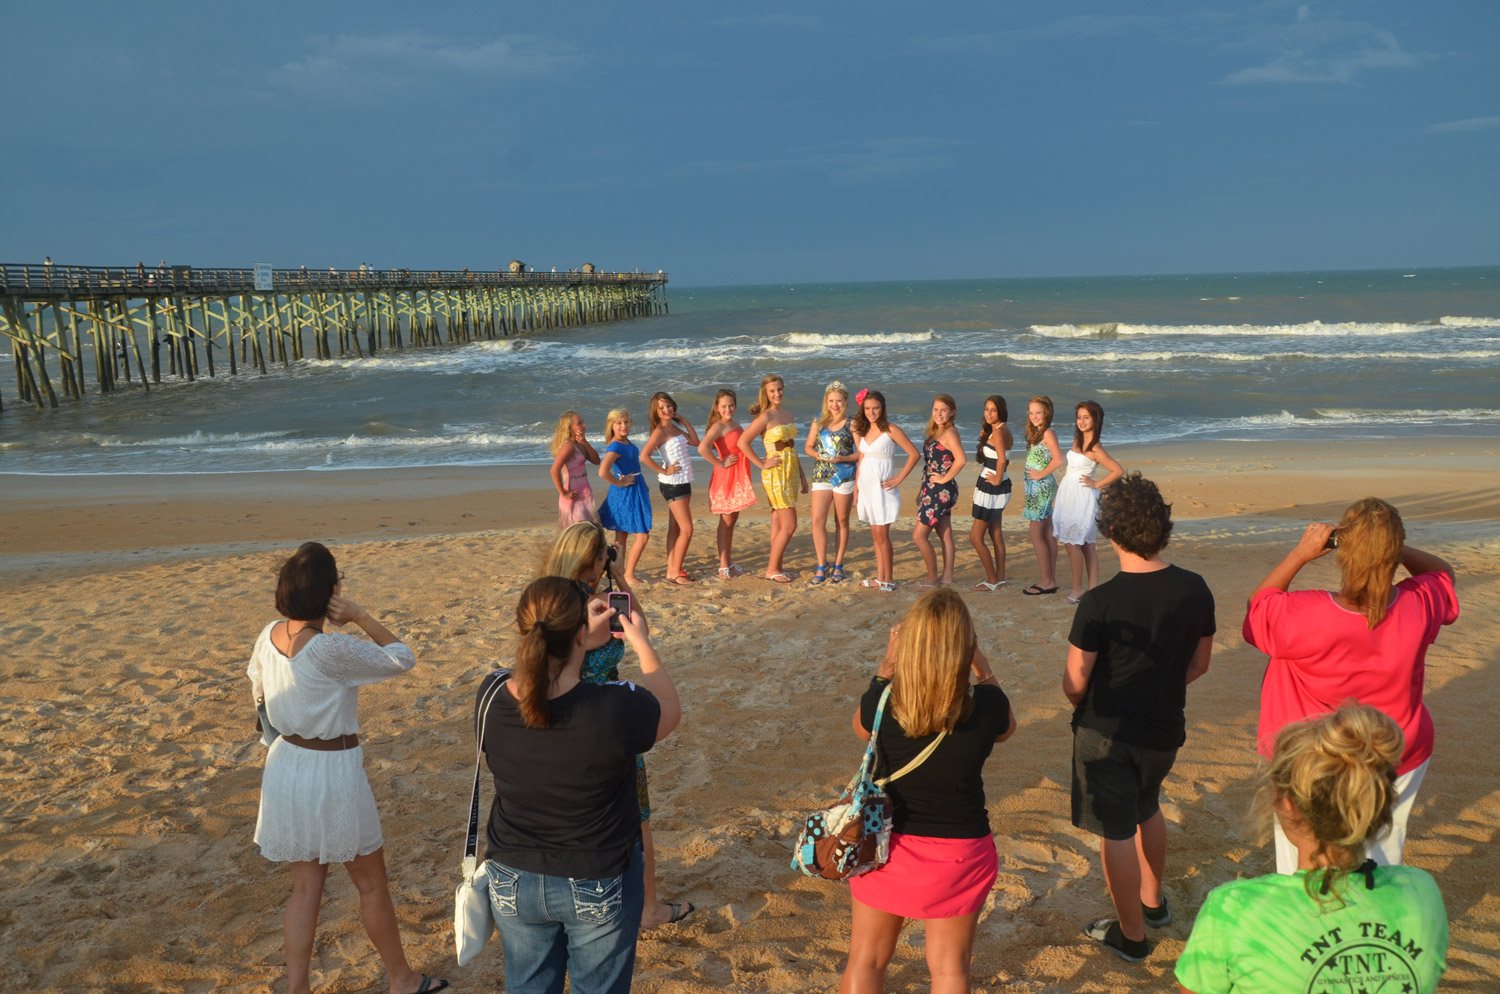 Miss Junior Flagler County Contestants Ages